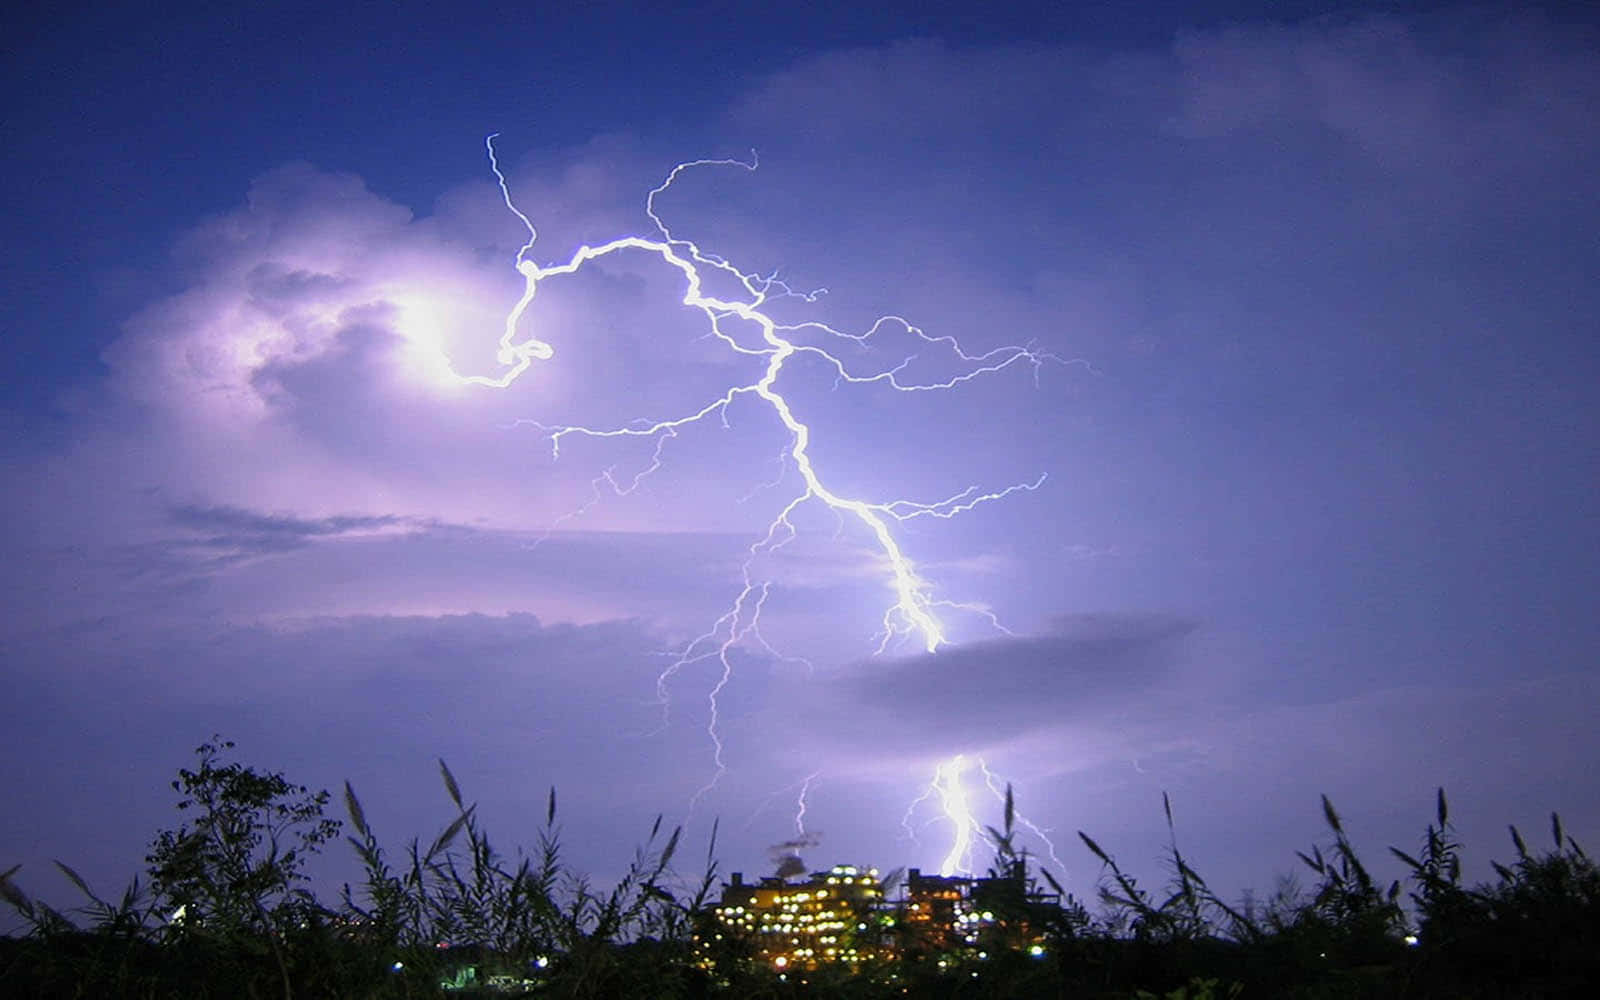 Capturing the fury of nature – a powerful lightning bolt streaks through the night sky